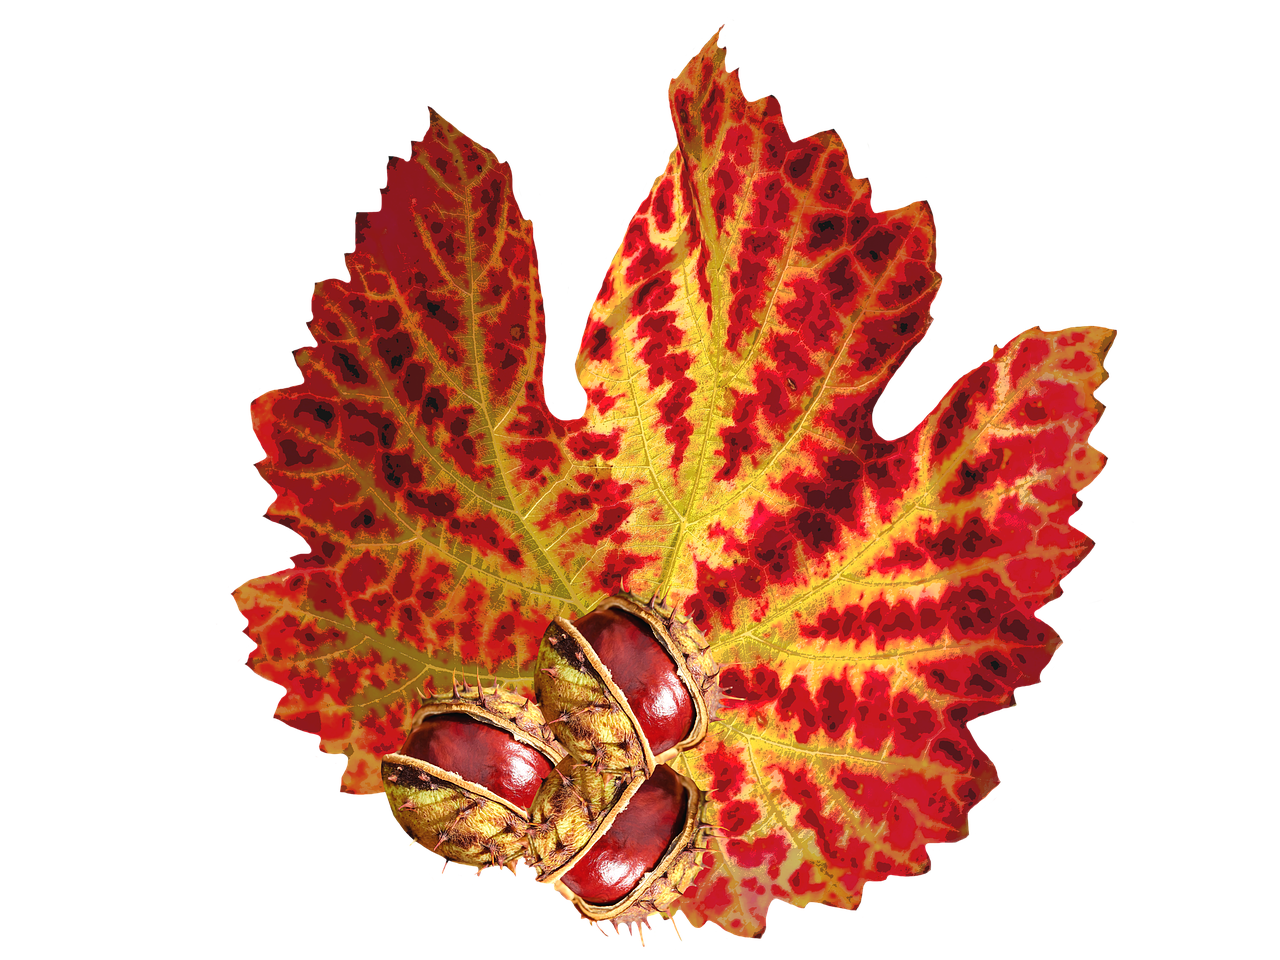 Vibrant Autumn Leafwith Seeds.jpg PNG